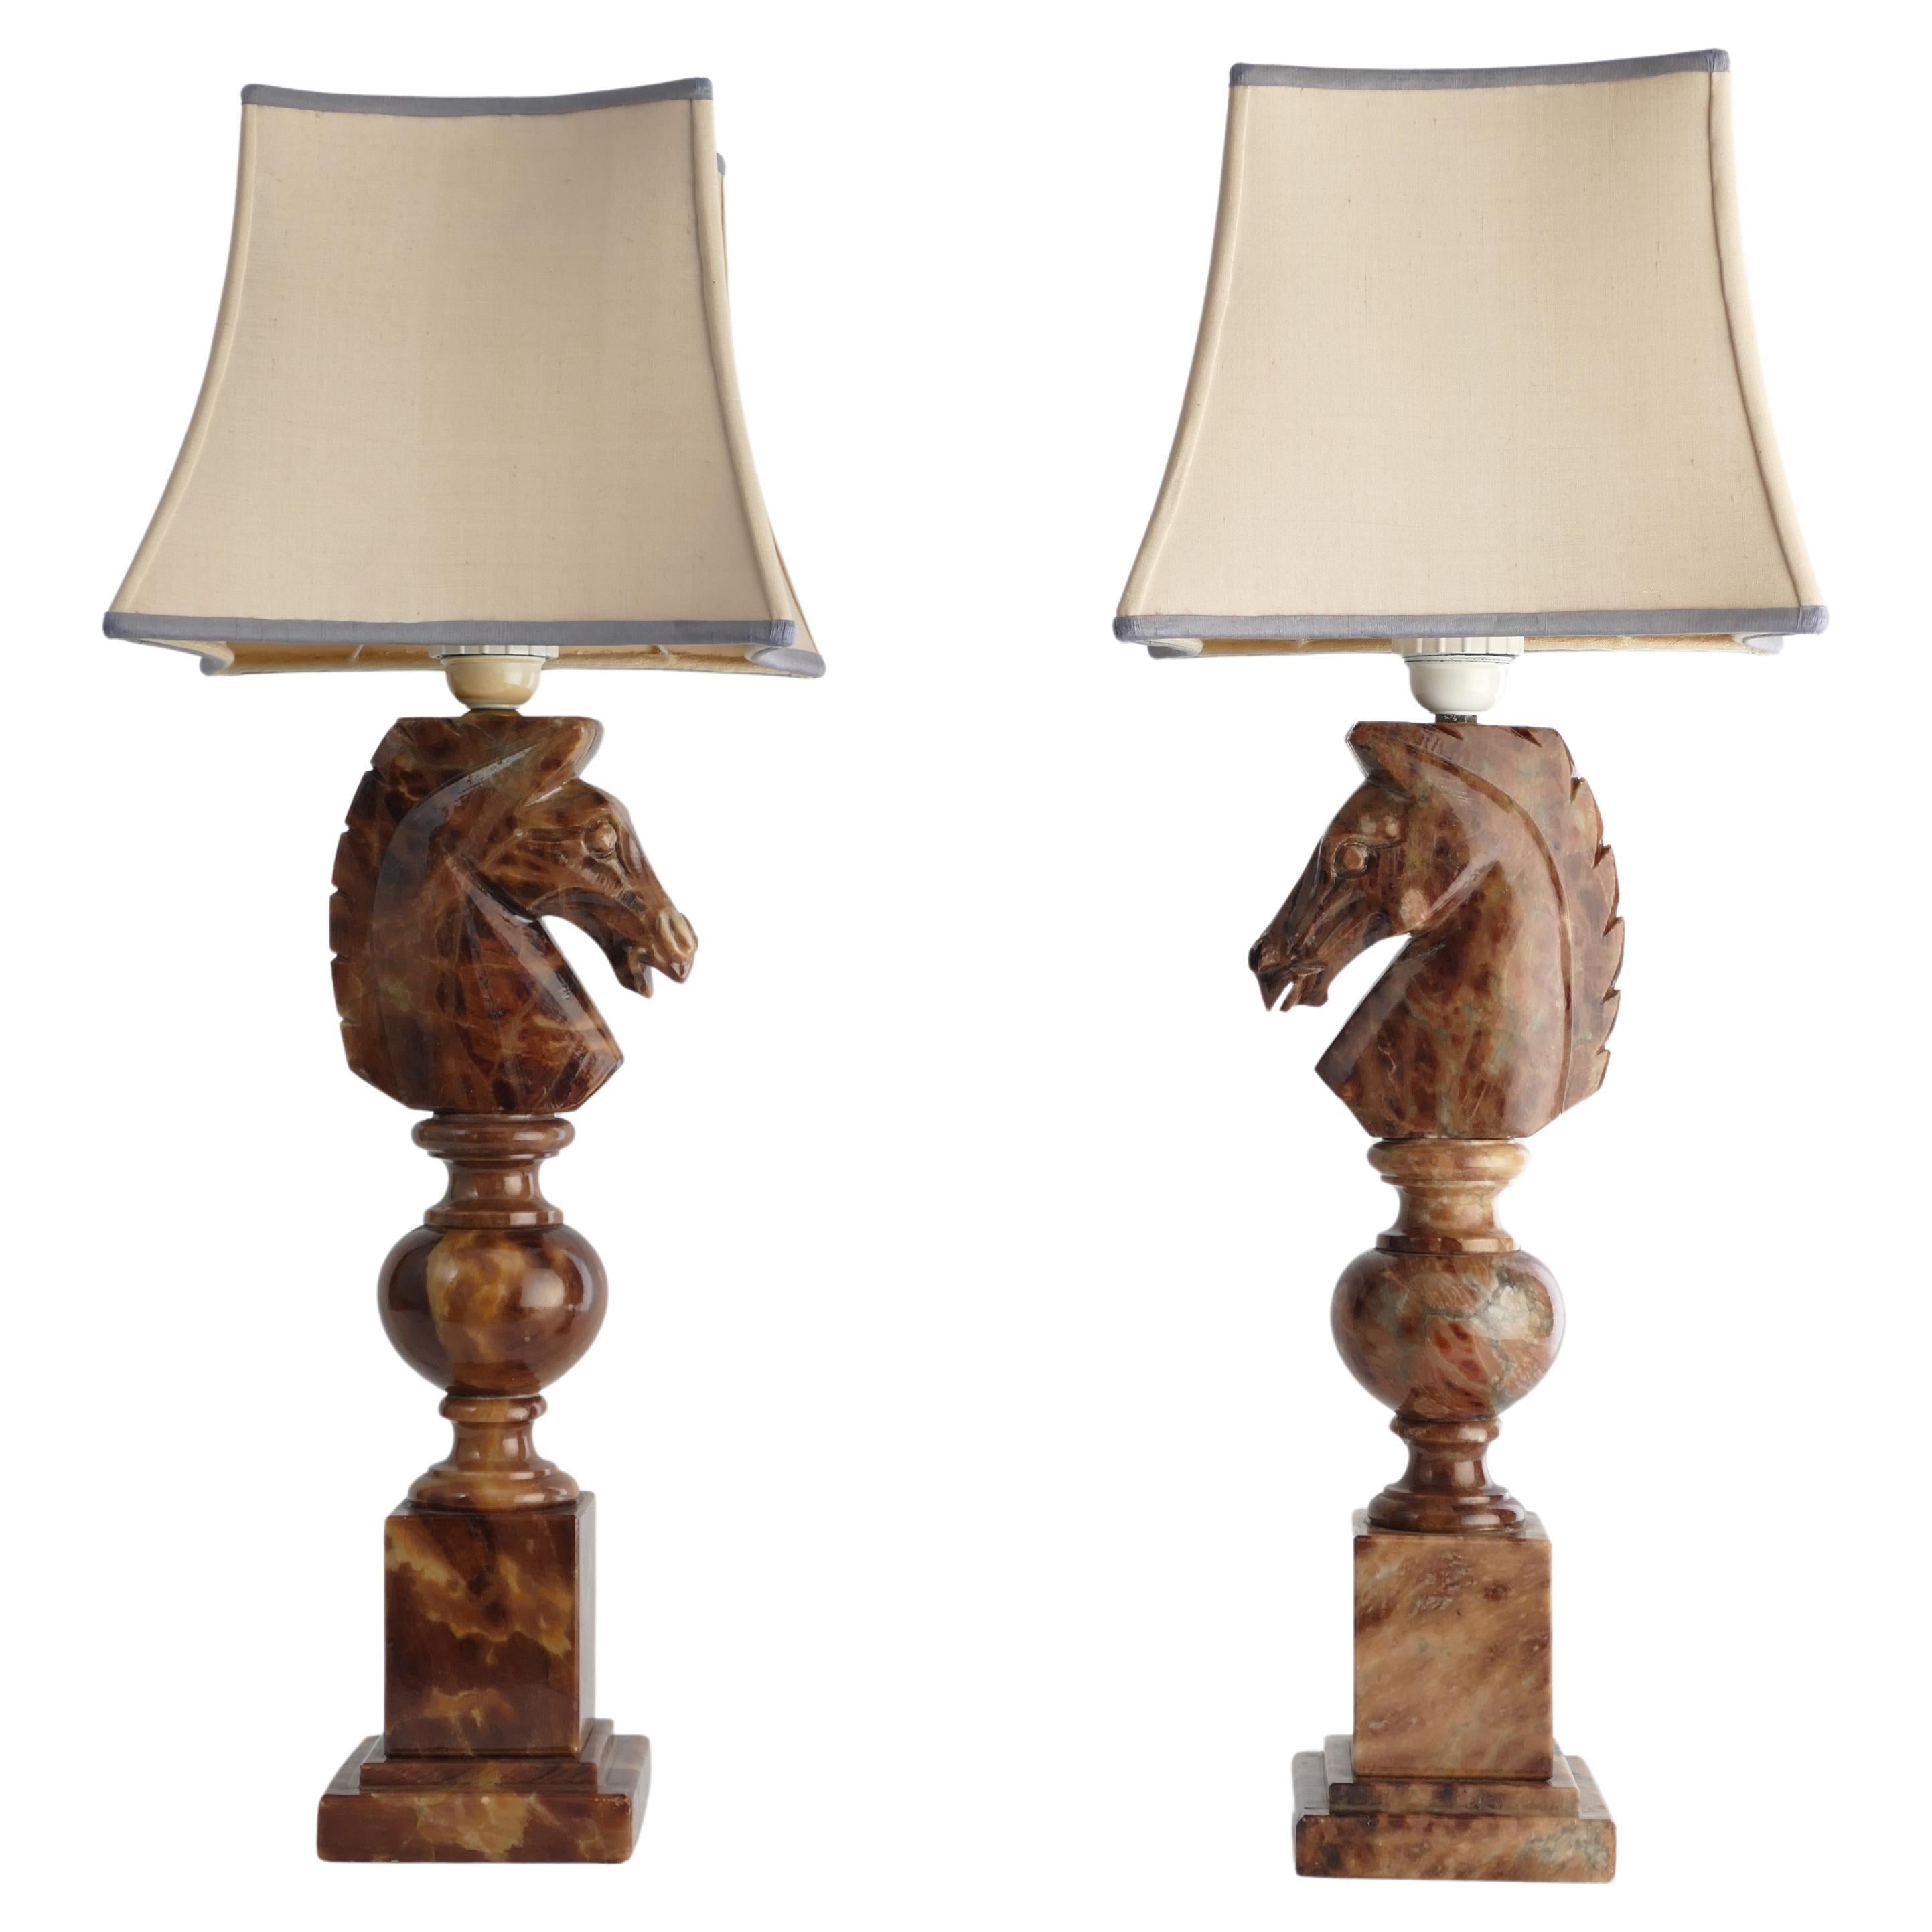 Hand-carved Brown Alabaster Knight Horse Head Table Lamps, Nordiska Kompaniet For Sale